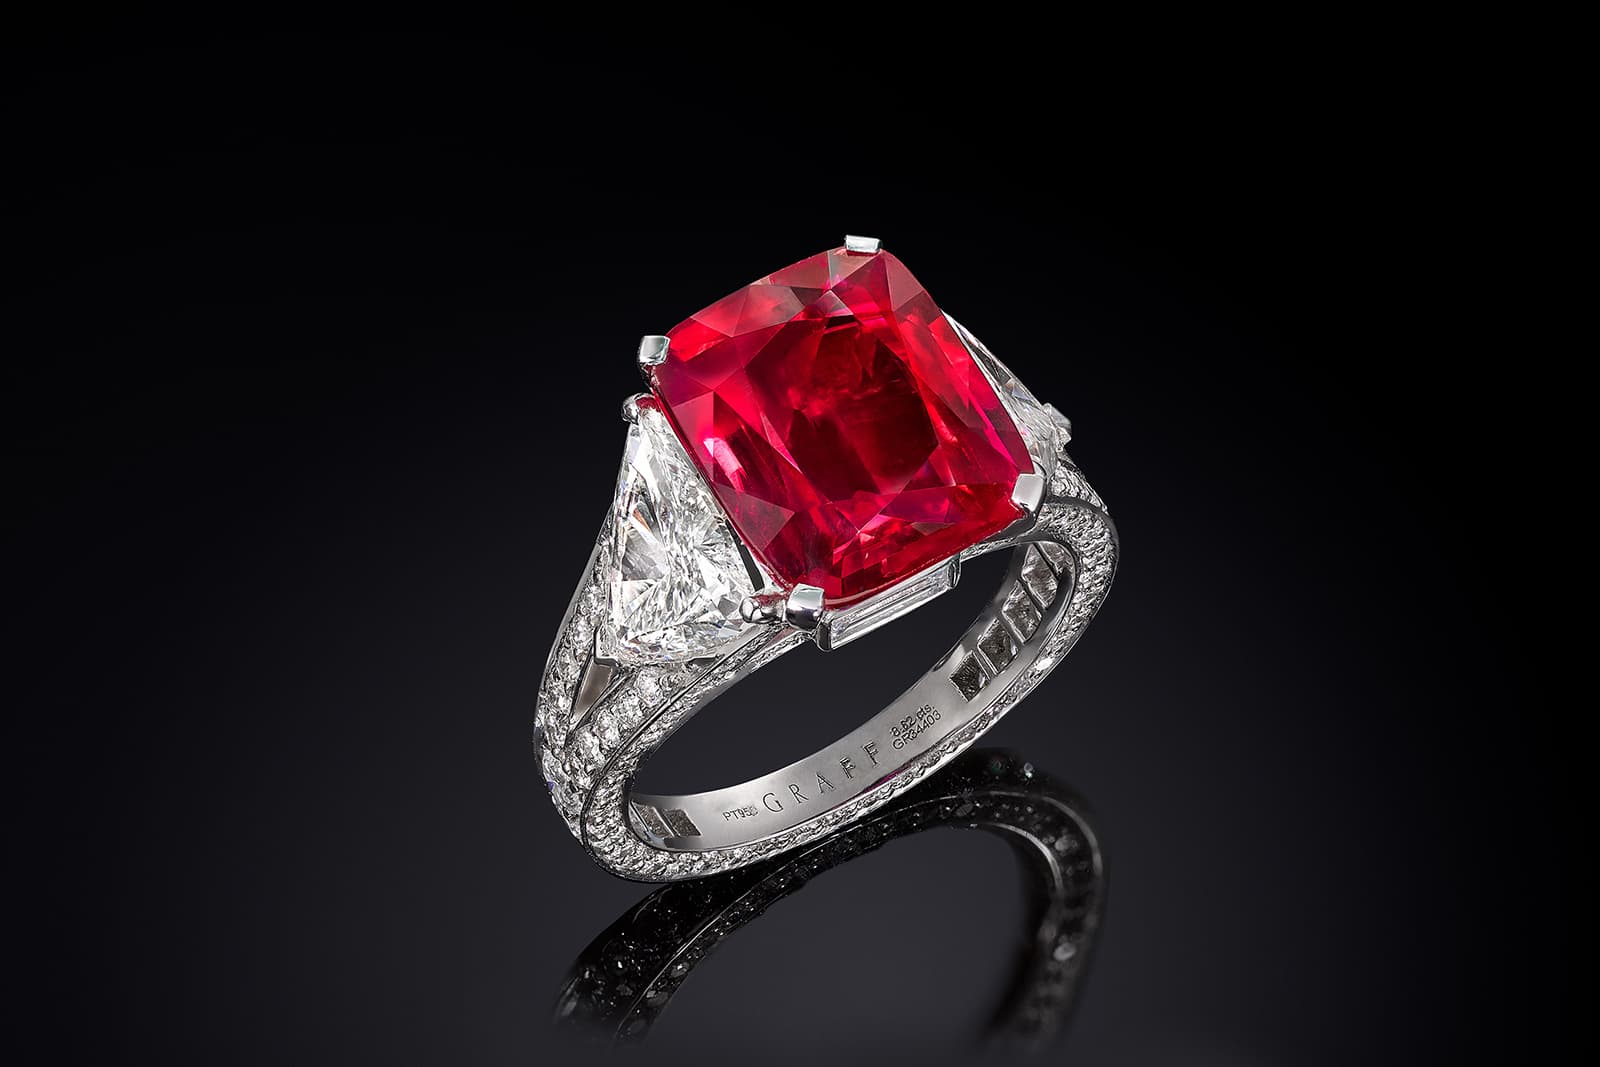 The 8.62 carat Graff Ruby is widely celebrated as the most important ruby in the world